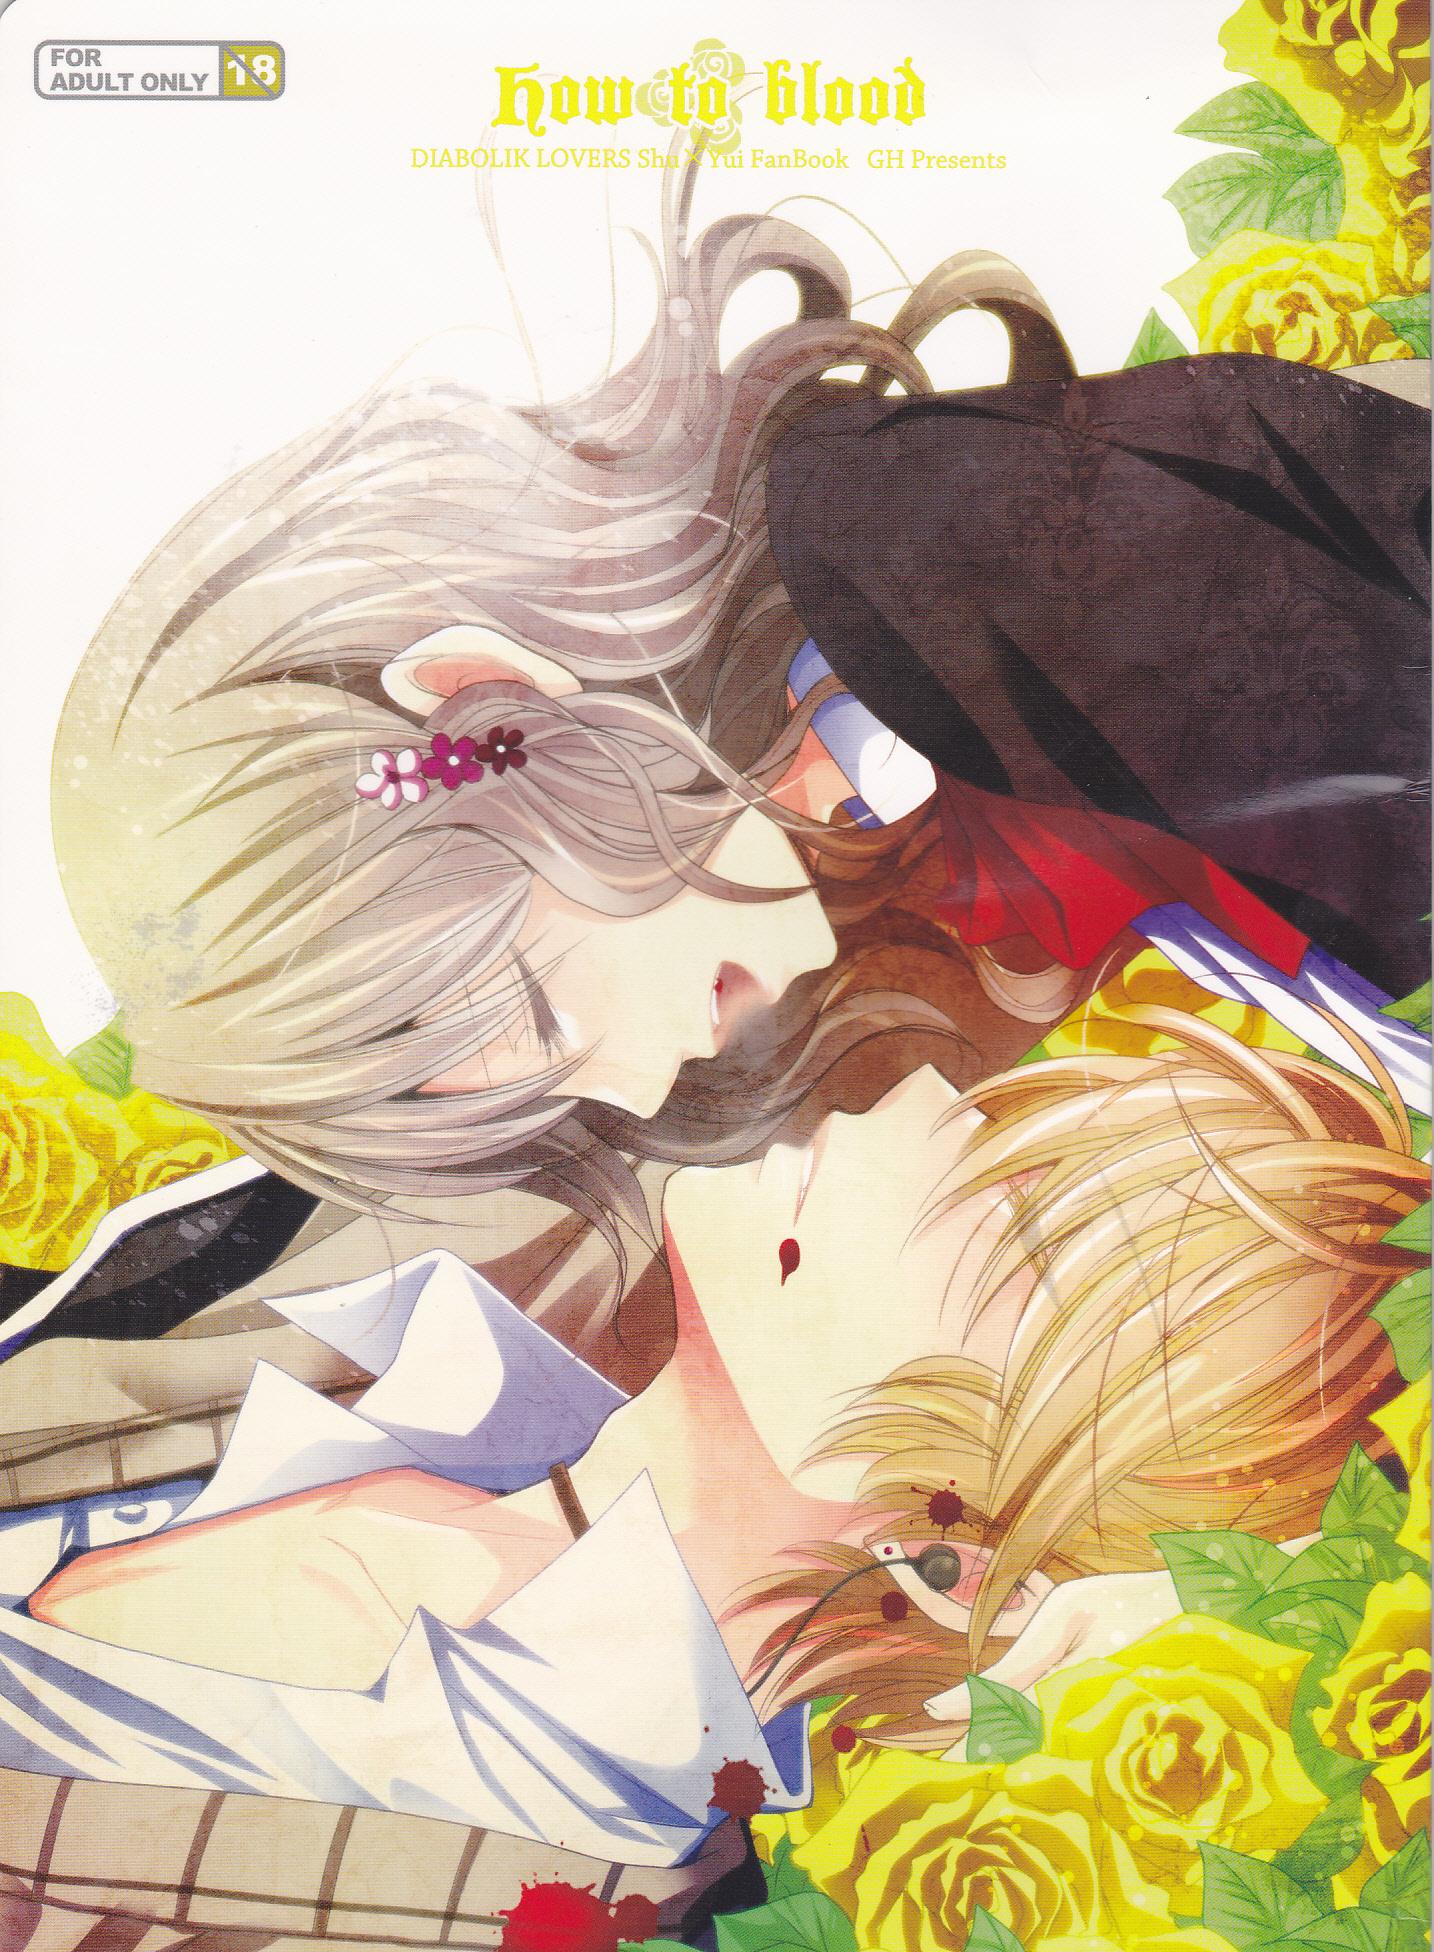 Free Amateur How to Blood - Diabolik lovers Indoor - Page 1